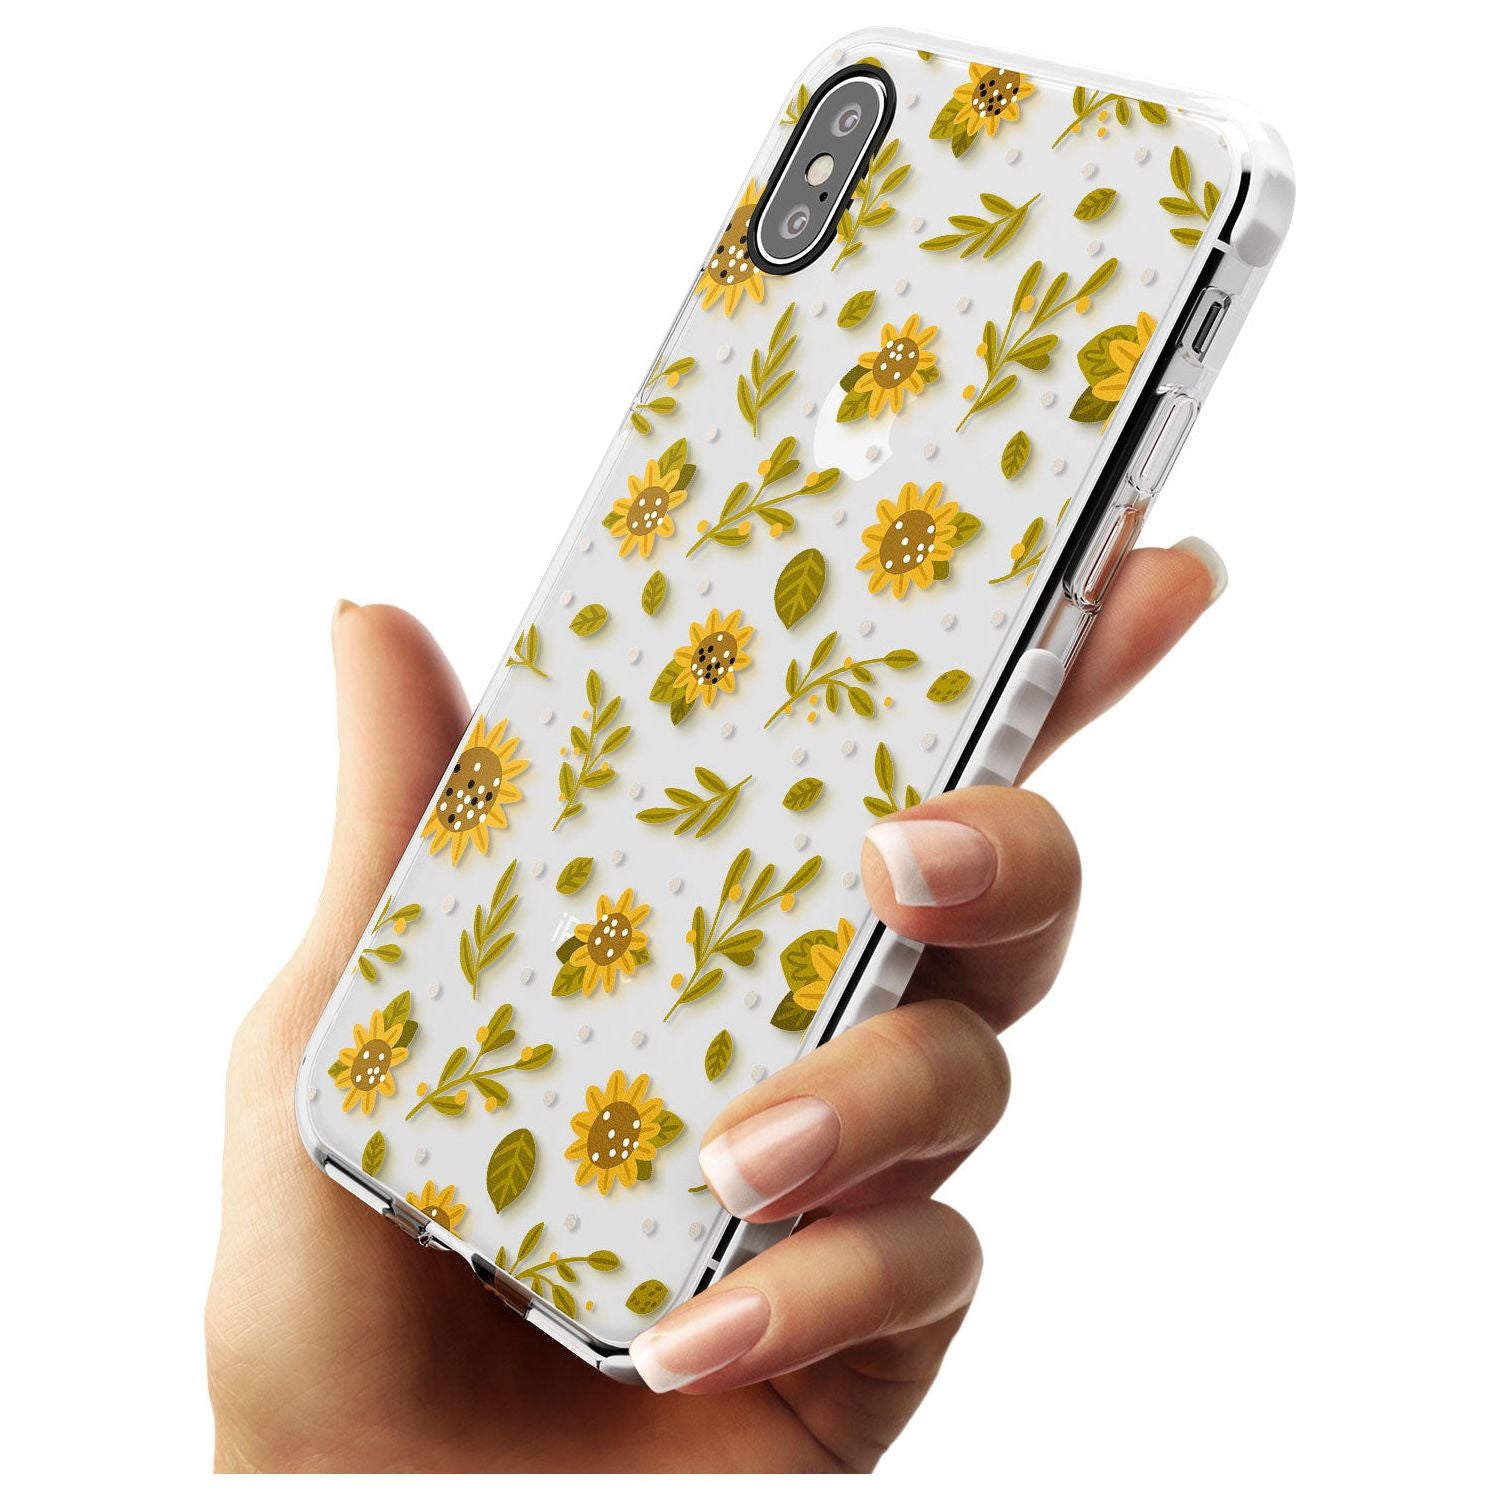 Sweet as Honey Patterns: Sunflowers (Clear) Impact Phone Case for iPhone X XS Max XR